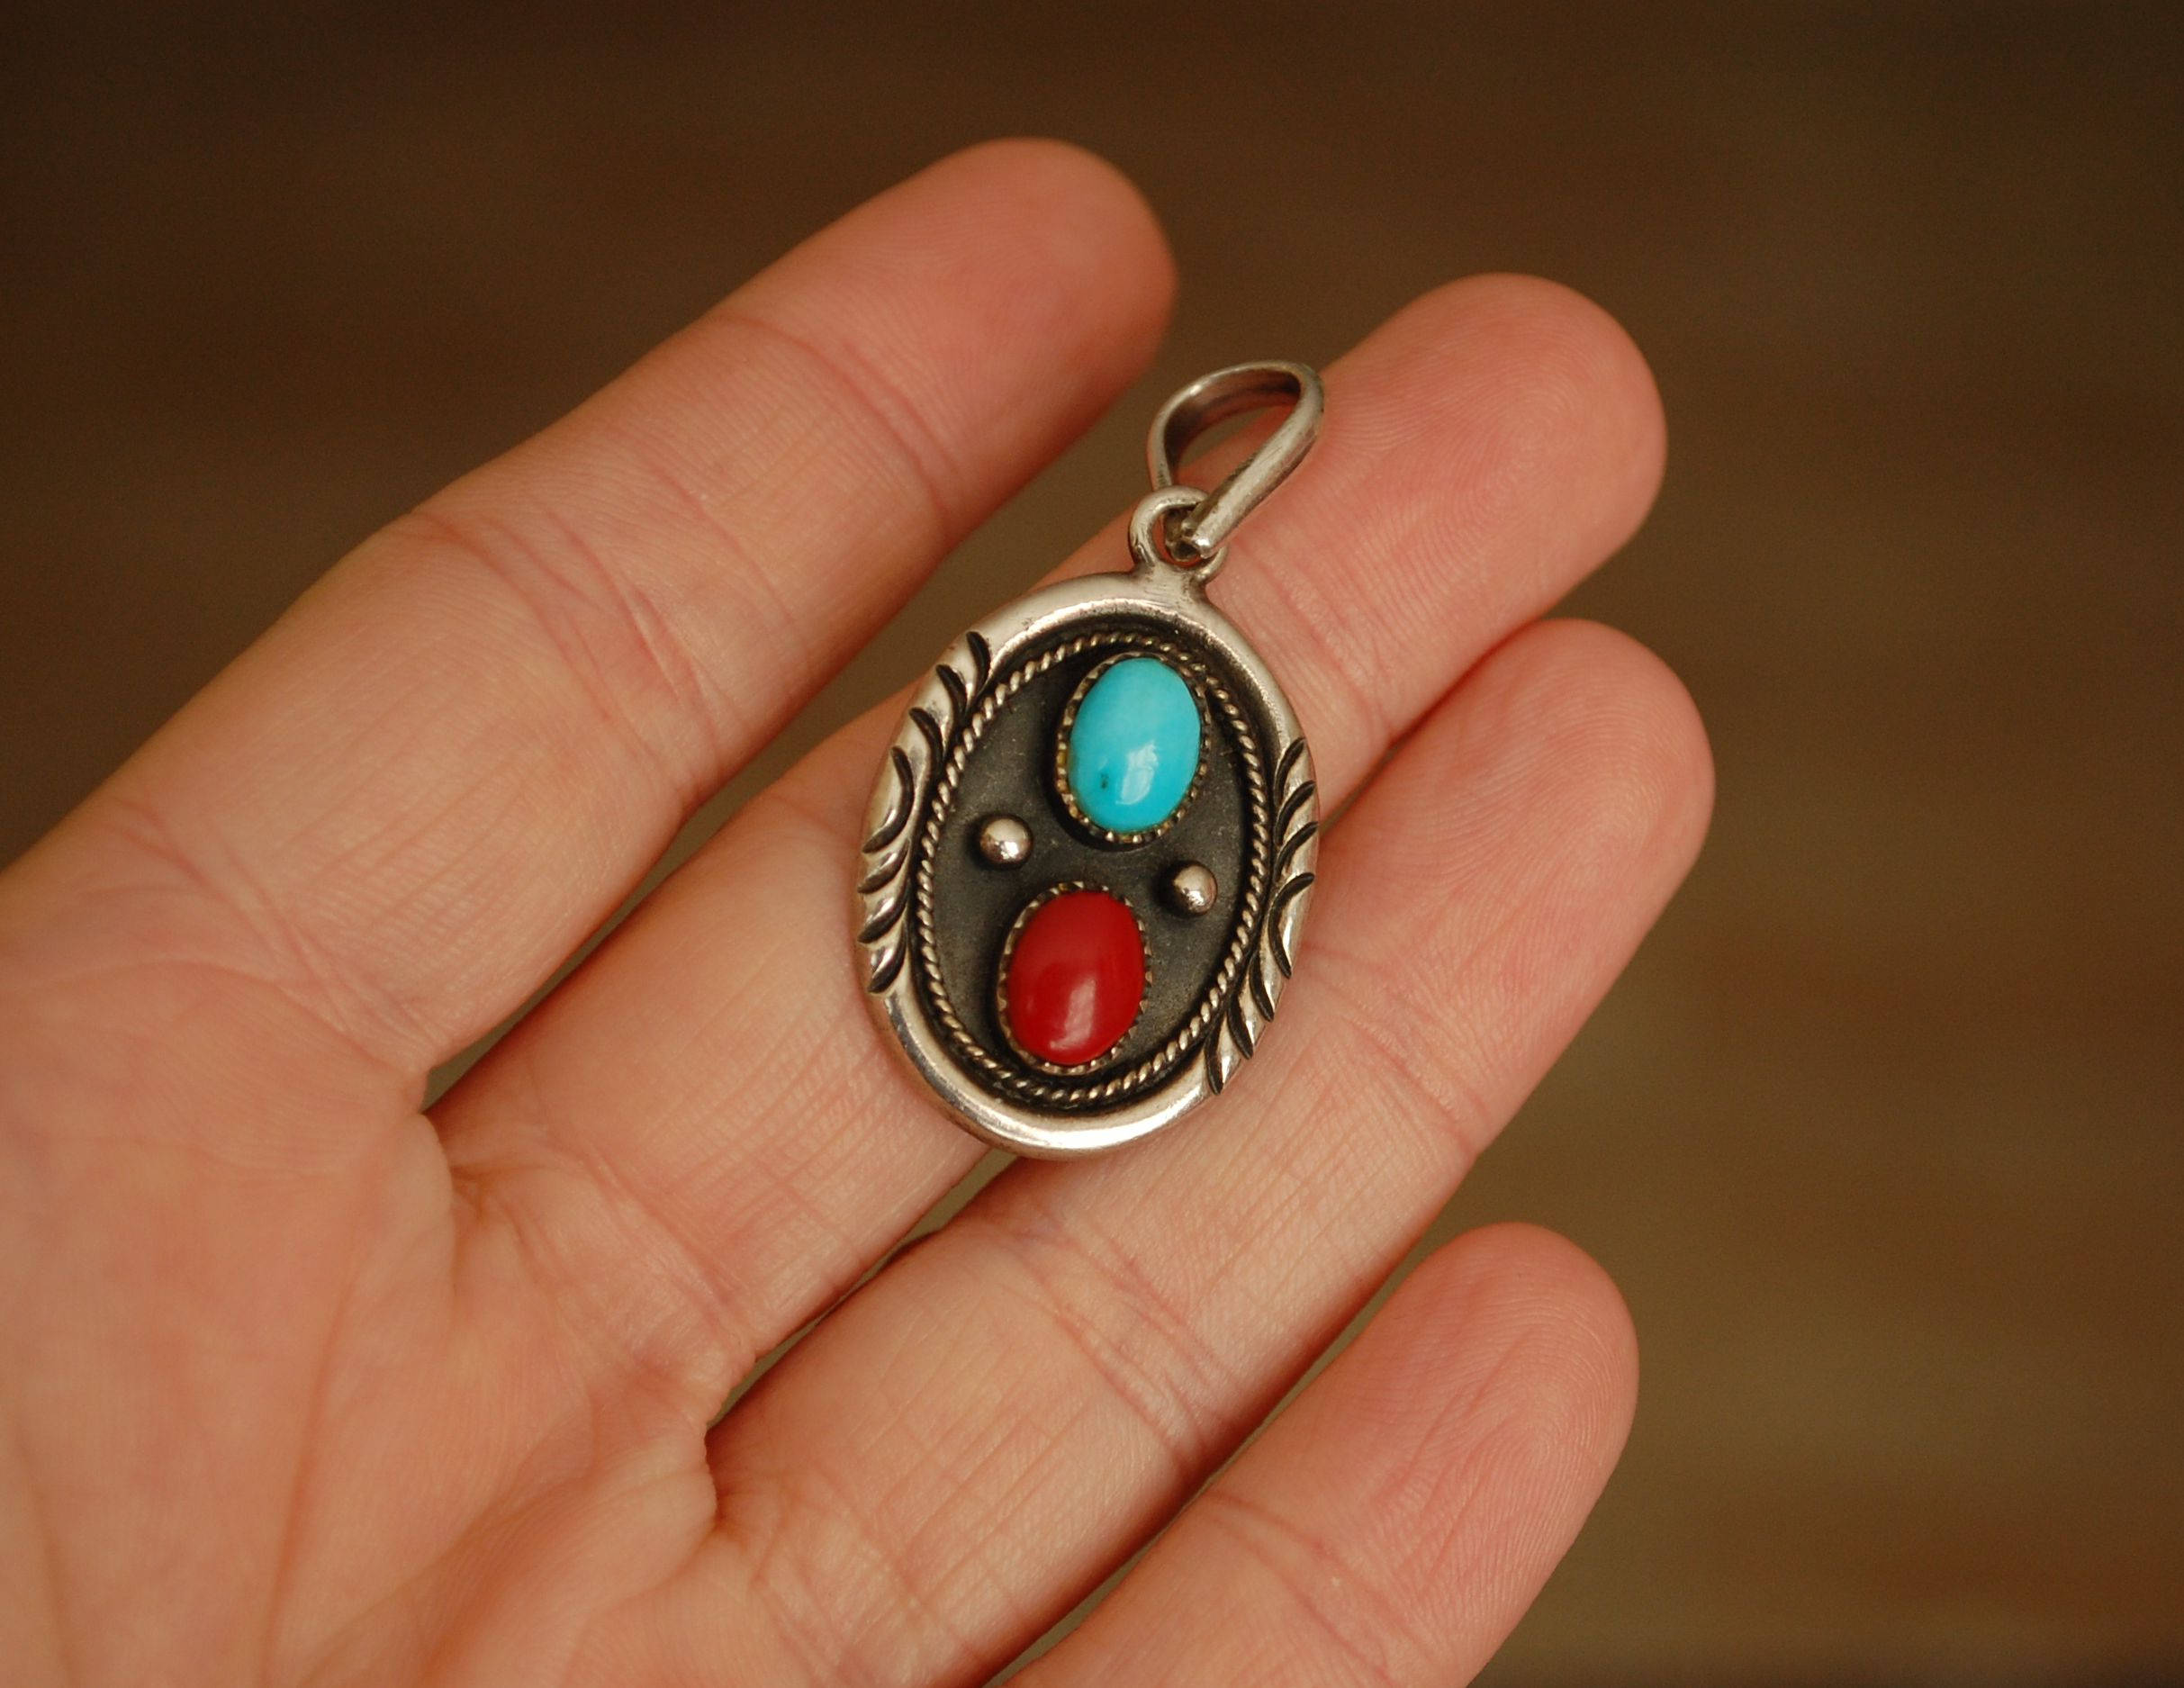 Navajo Coral and Turquoise Pendant - Native American Pendant with Coral and Turquoise